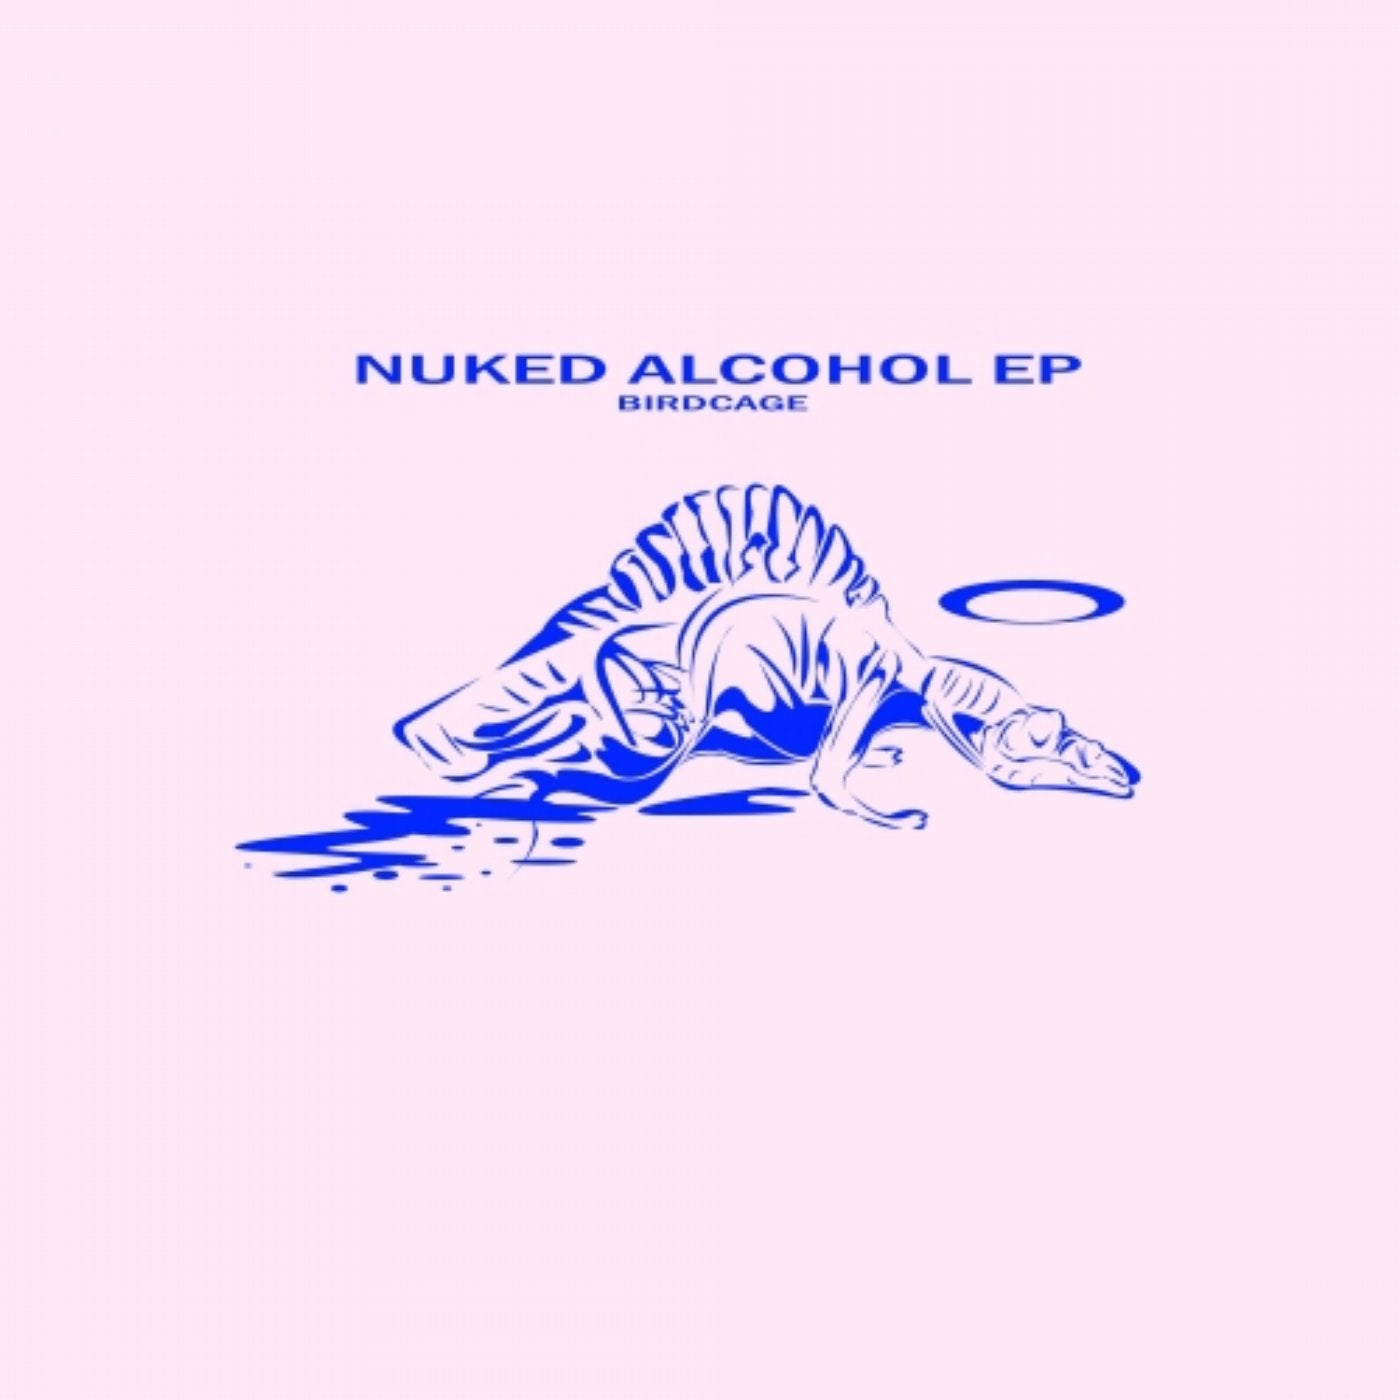 NUKED ALCOHOL EP